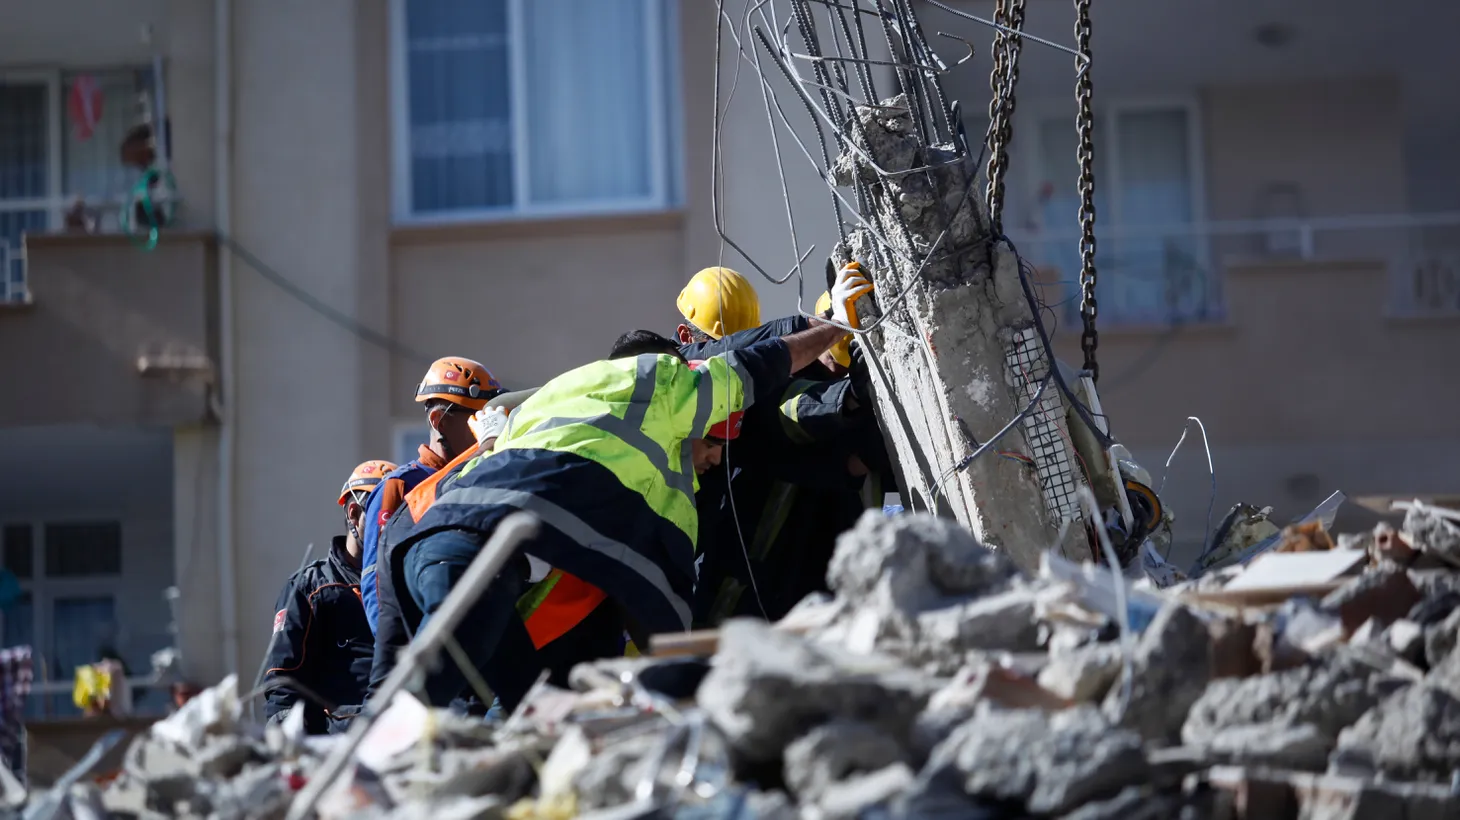 Crews from across the world are working around the clock to rescue remaining survivors of the 7.8 magnitude earthquake that struck Turkey and Syria on Monday morning.